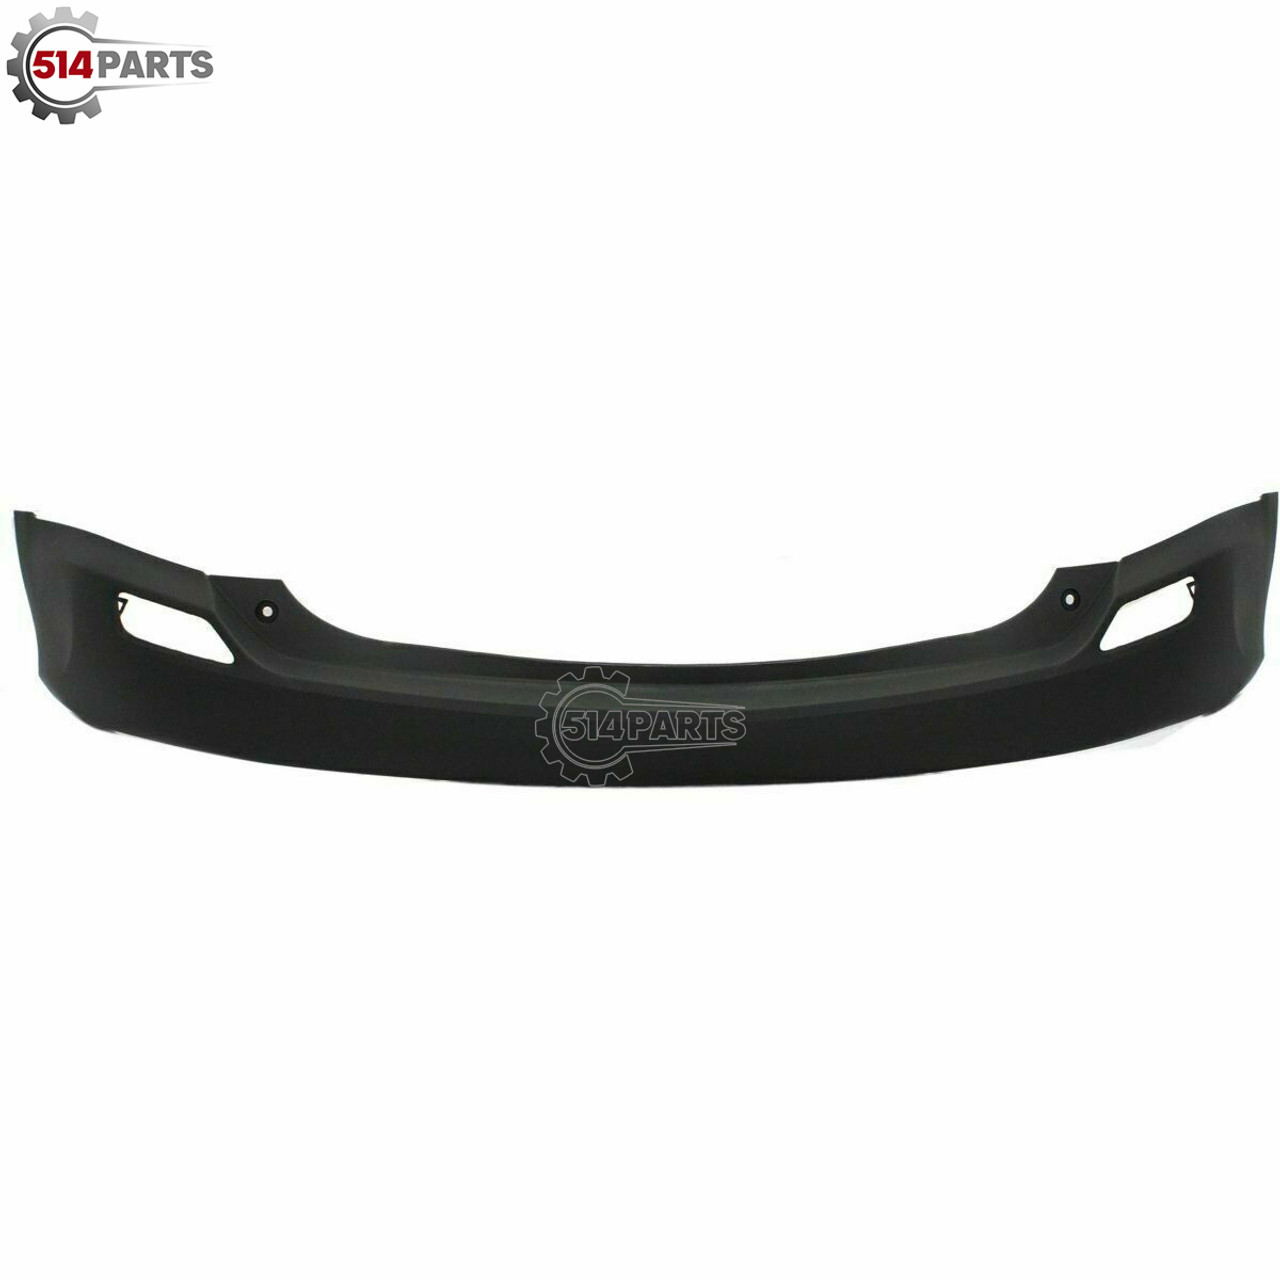 2013 - 2015 TOYOTA RAV4 TEXTURED REAR BUMPER COVER without SENSOR HOLES - PARE-CHOCS ARRIERE TEXTURE